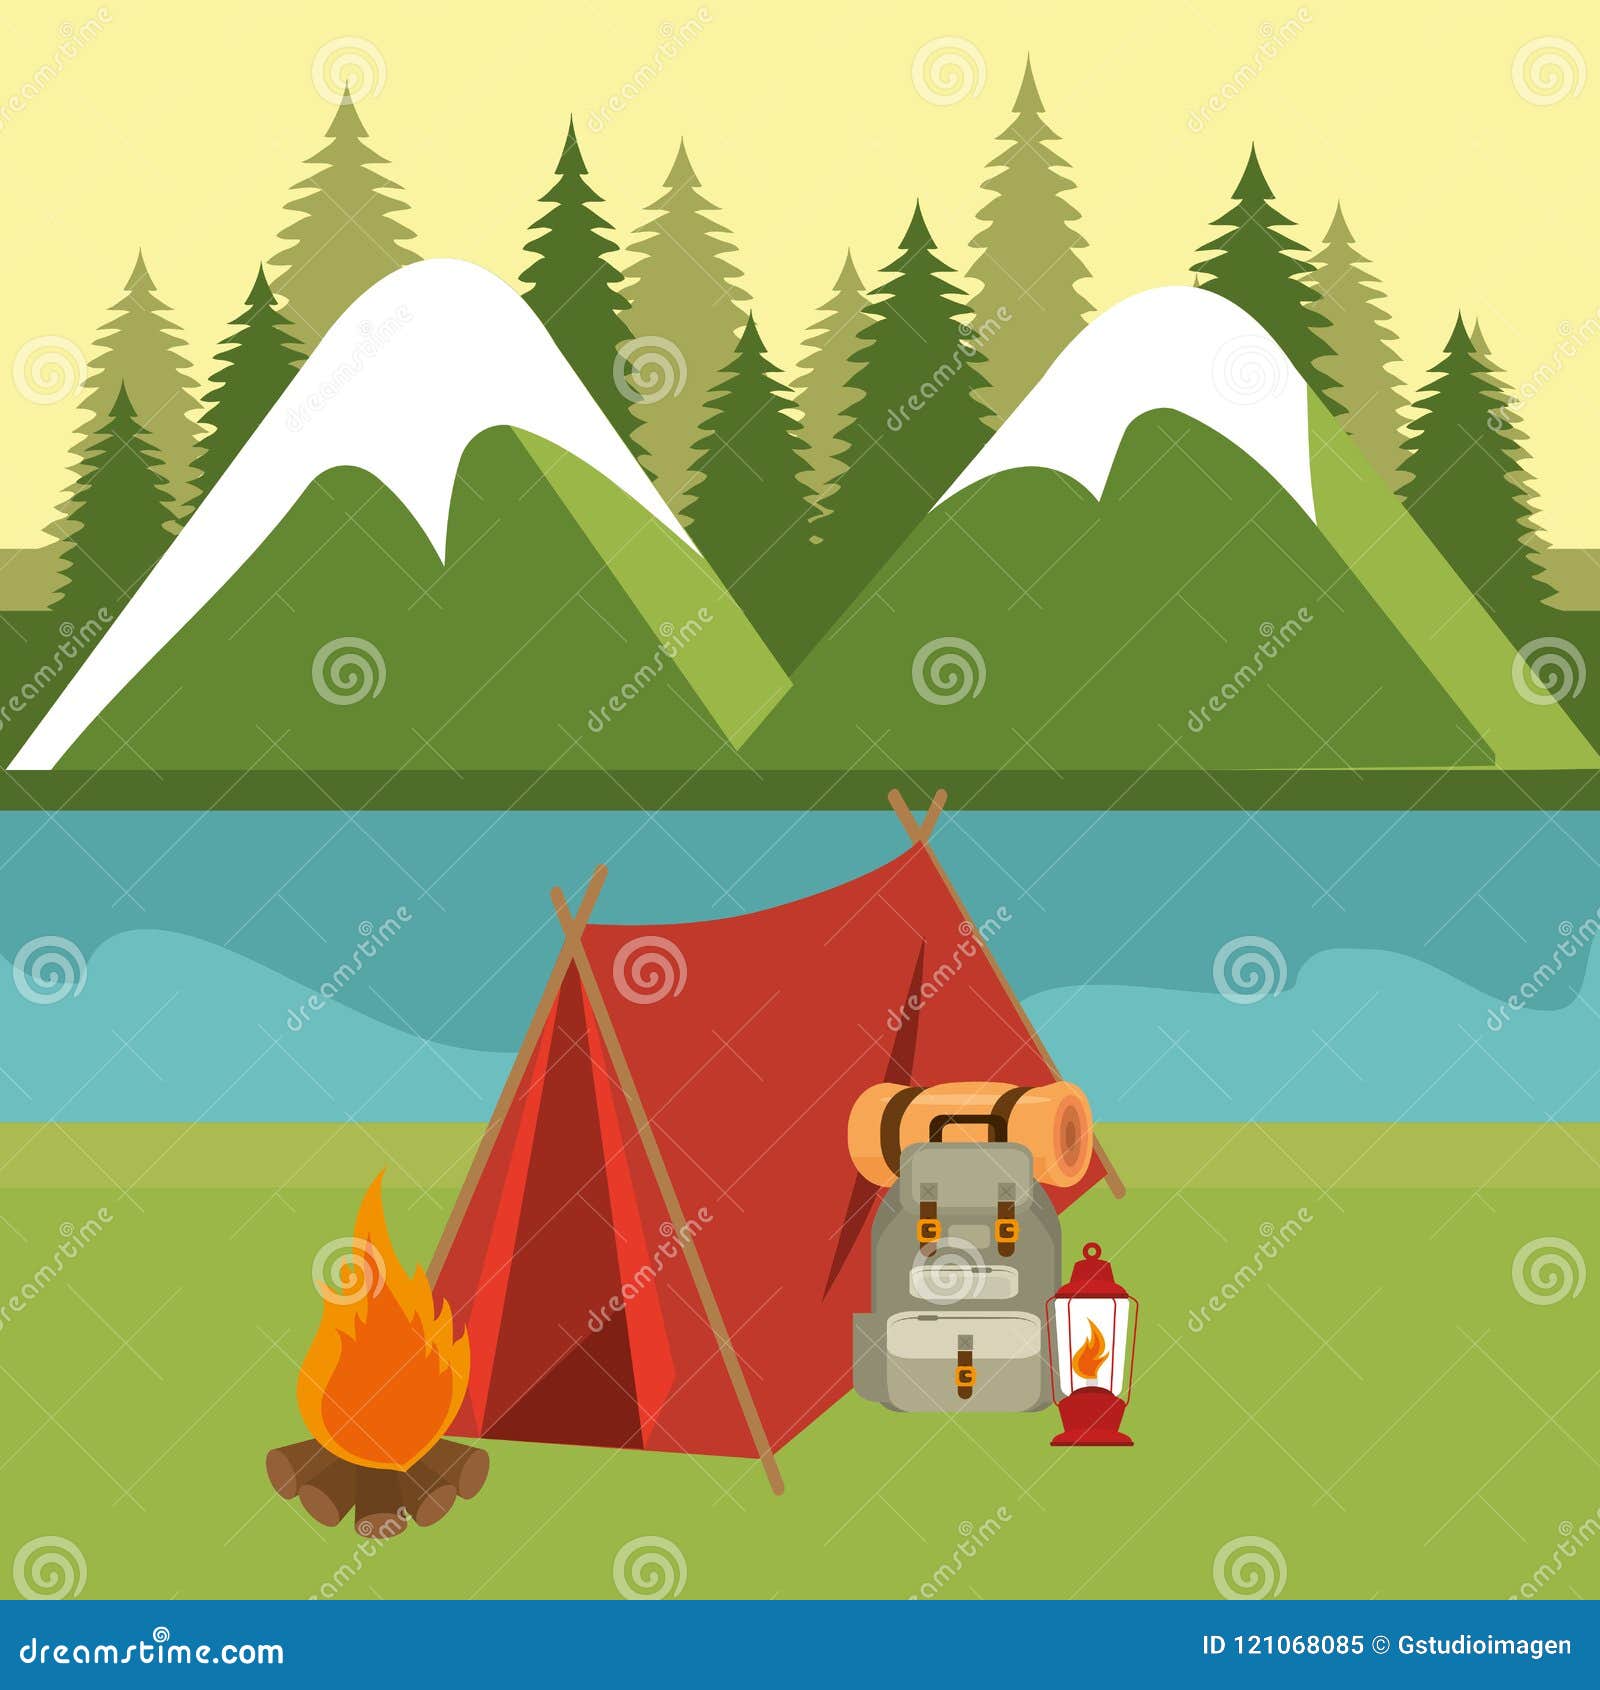 Camping Zone with Tent Scene Stock Vector - Illustration of flame ...